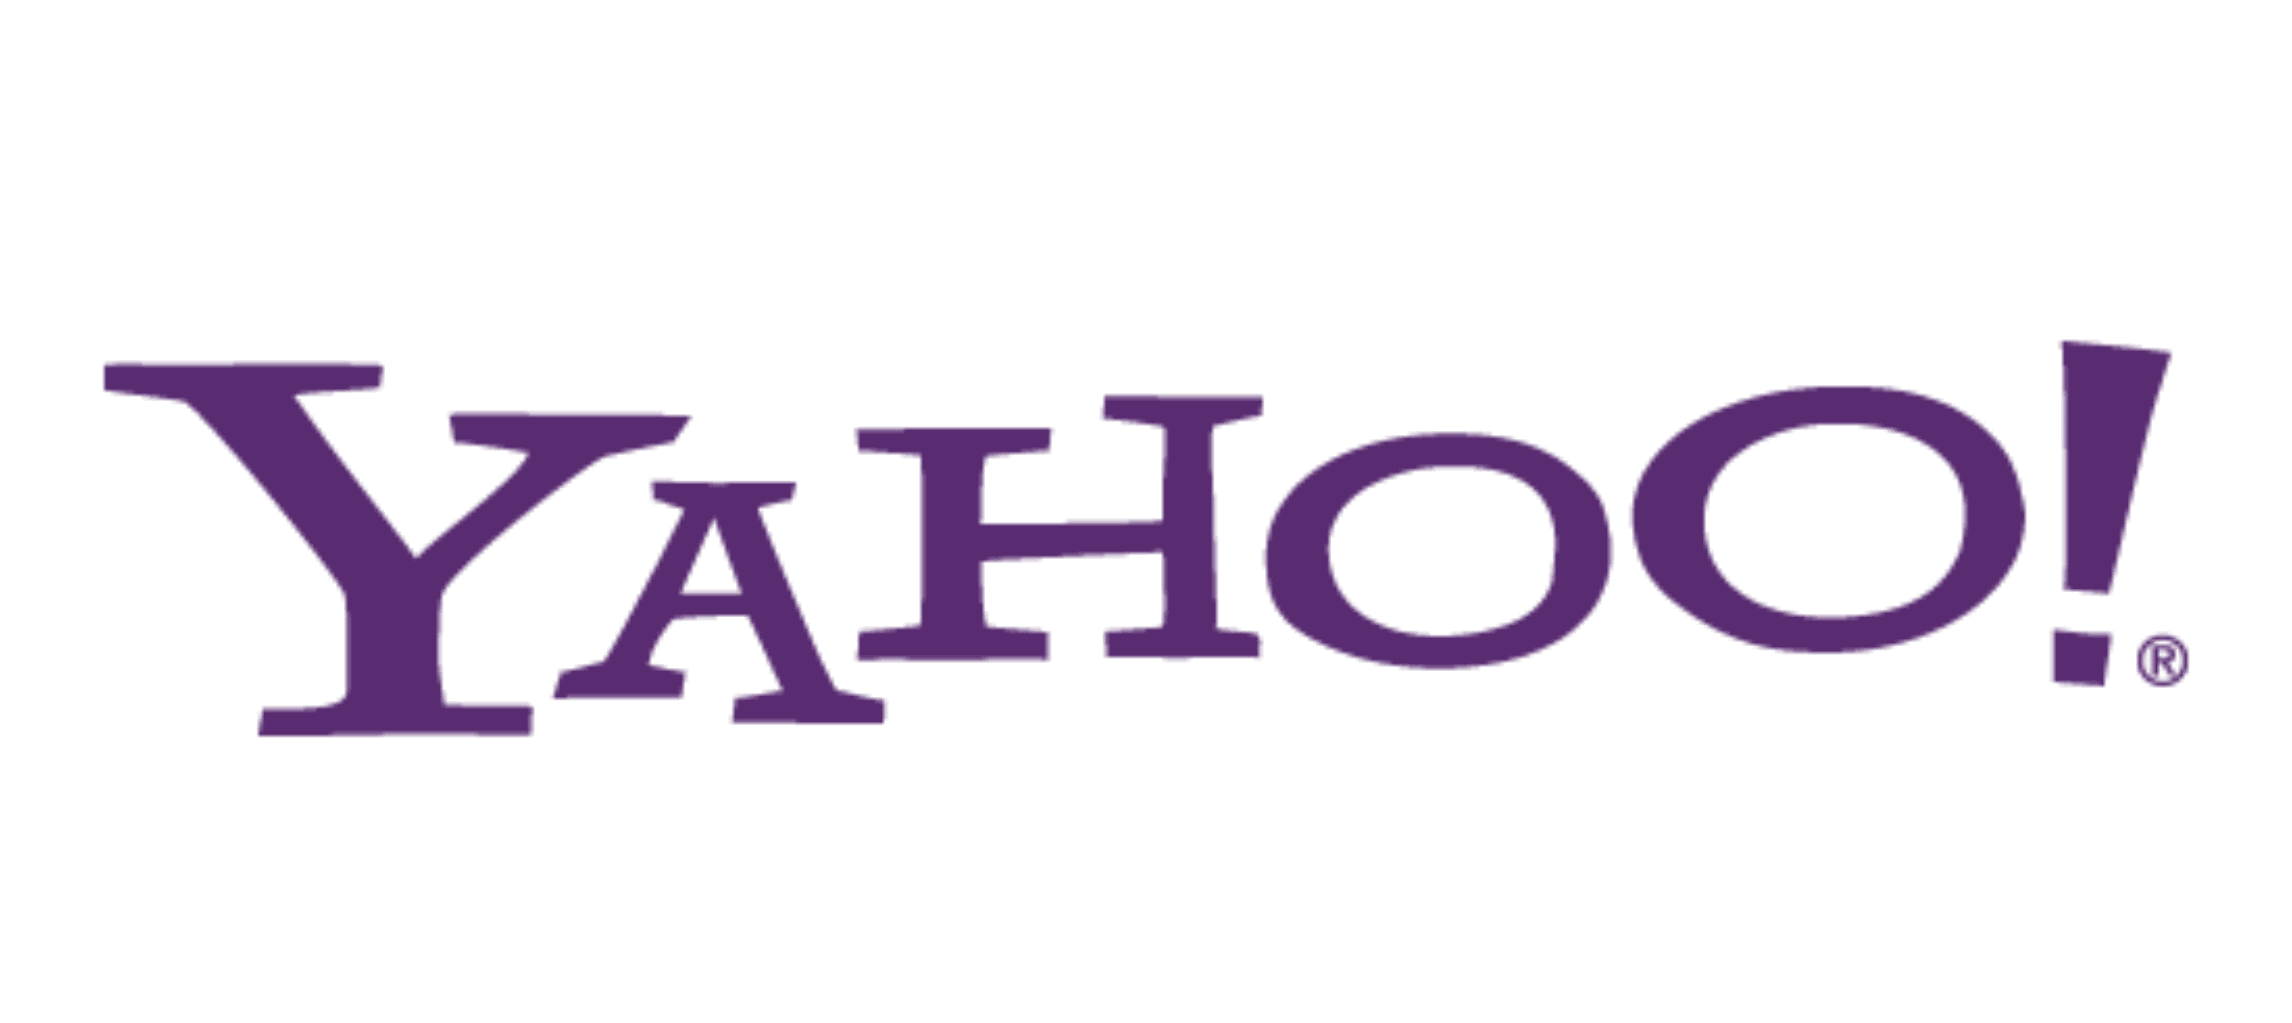 Yahoo’s New Logo Is Boring, And That’s The Whole Point